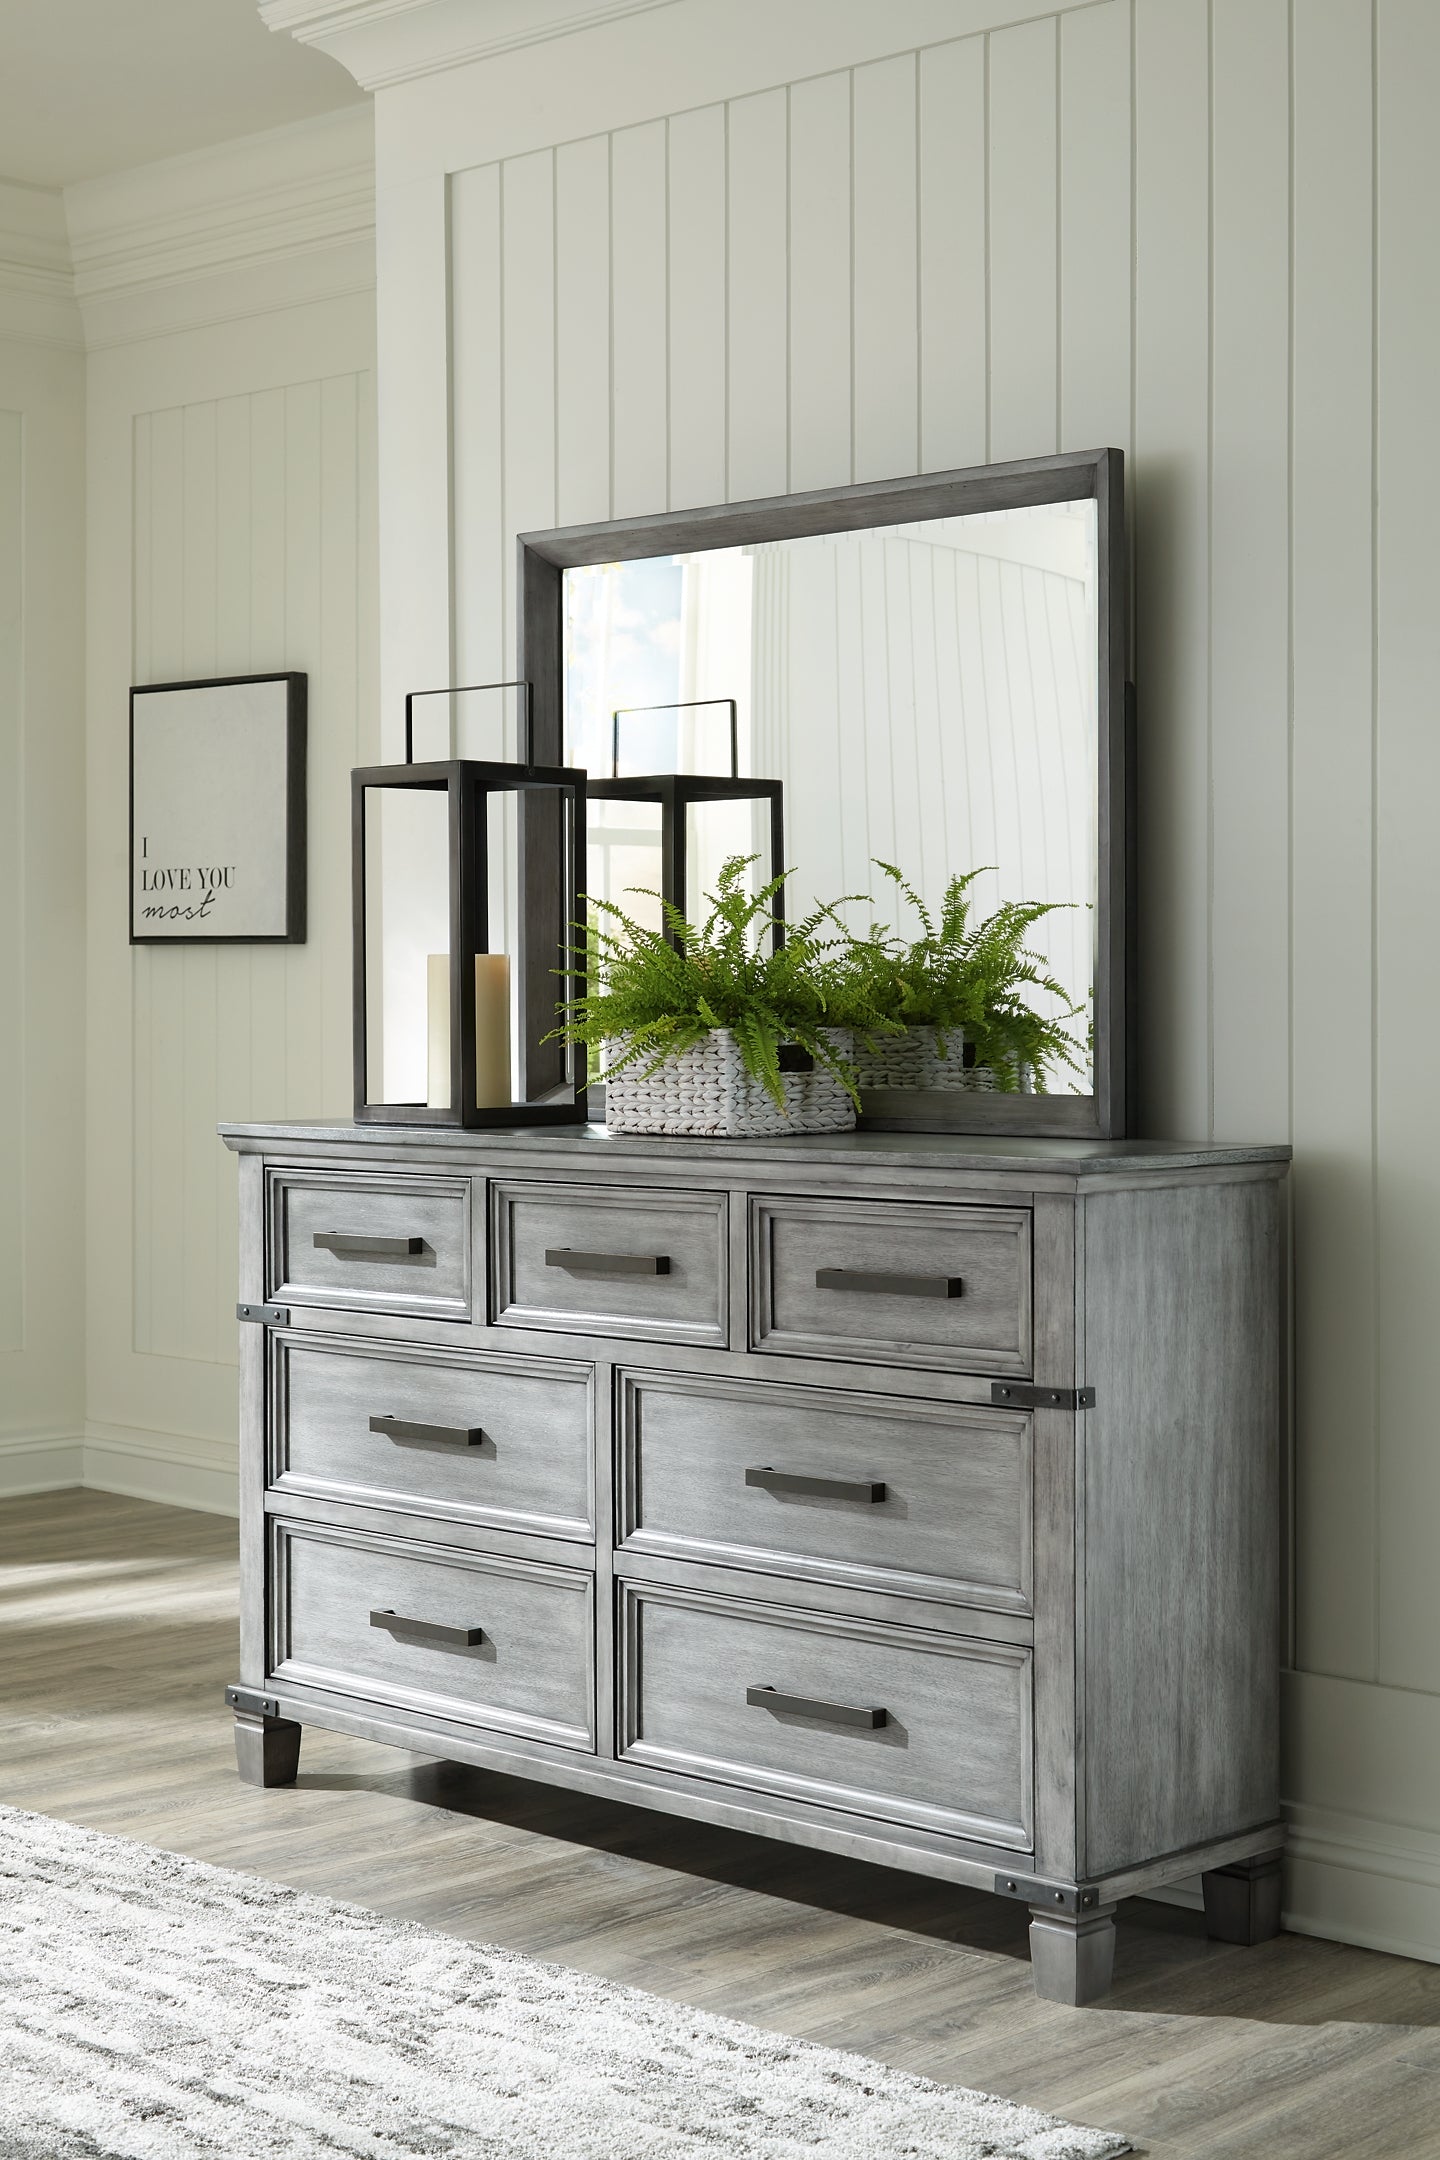 Russelyn Dresser and Mirror at Cloud 9 Mattress & Furniture furniture, home furnishing, home decor